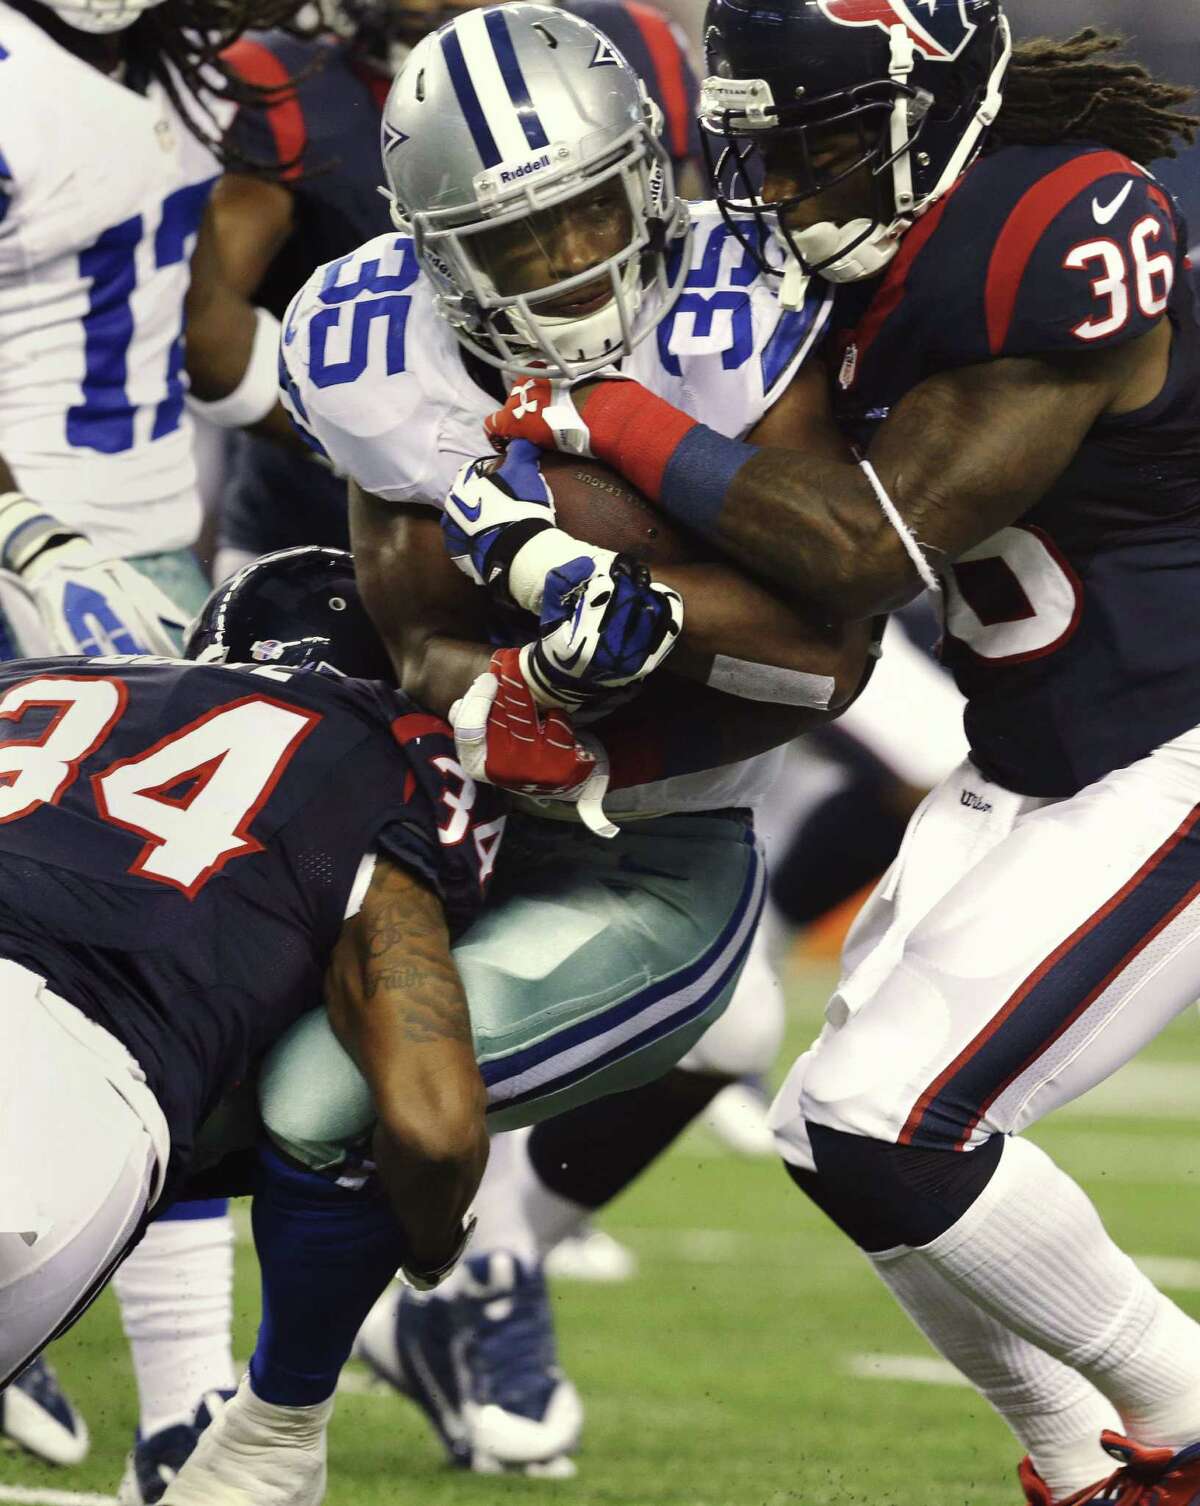 Cowboys running back Joseph Randle is swarmed by Texans A.J. Bouye (left) and D.J. Swearinger in the first half.